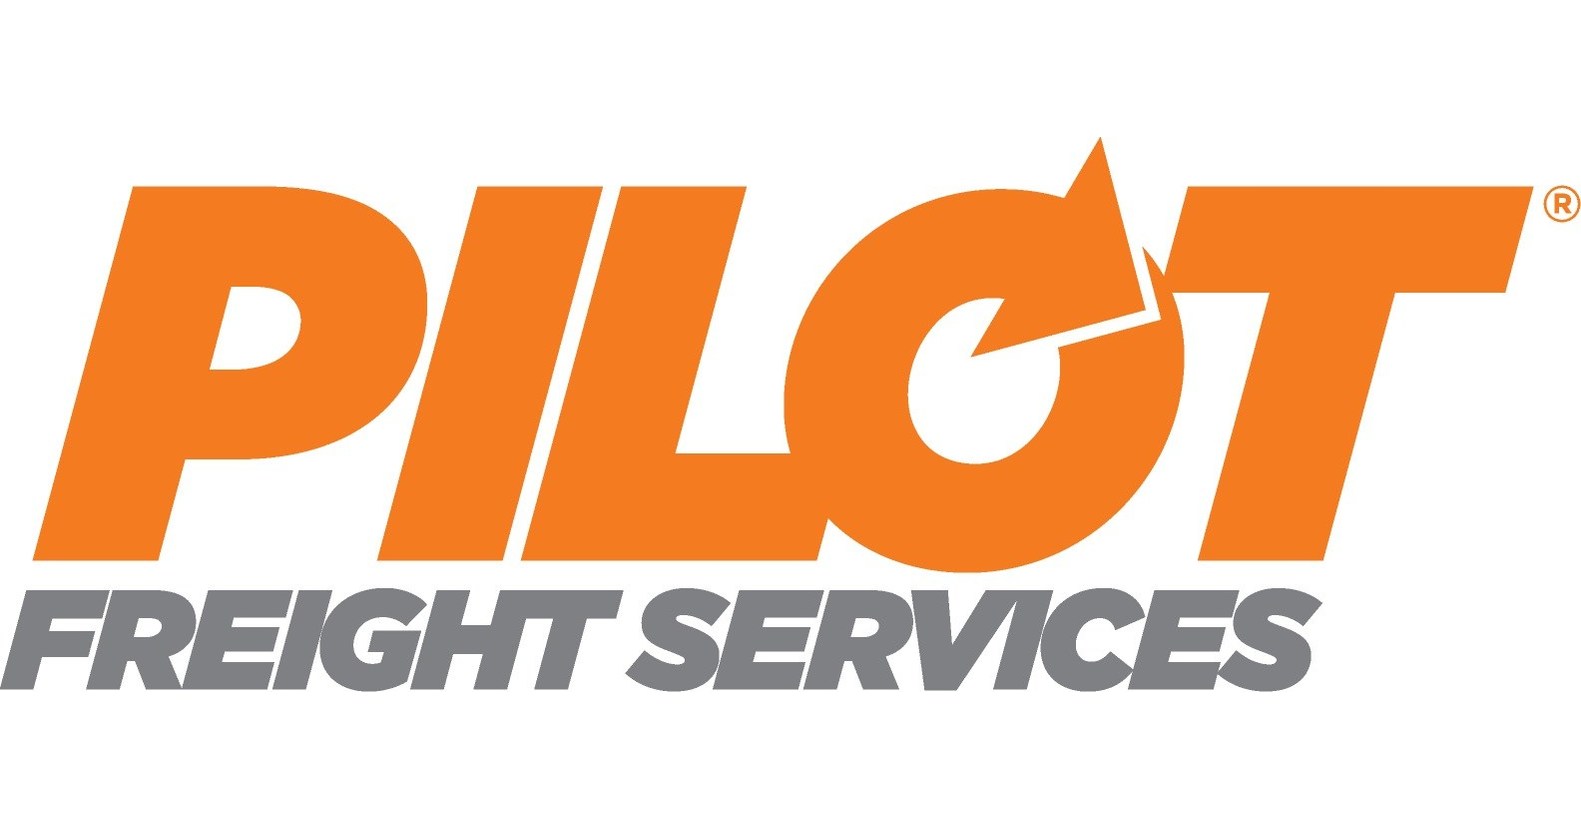 Pilot Freight Services And American Linehaul Corporation Announce Strategic Partnership To Expand Middle Mile Expedited LTL Capabilities